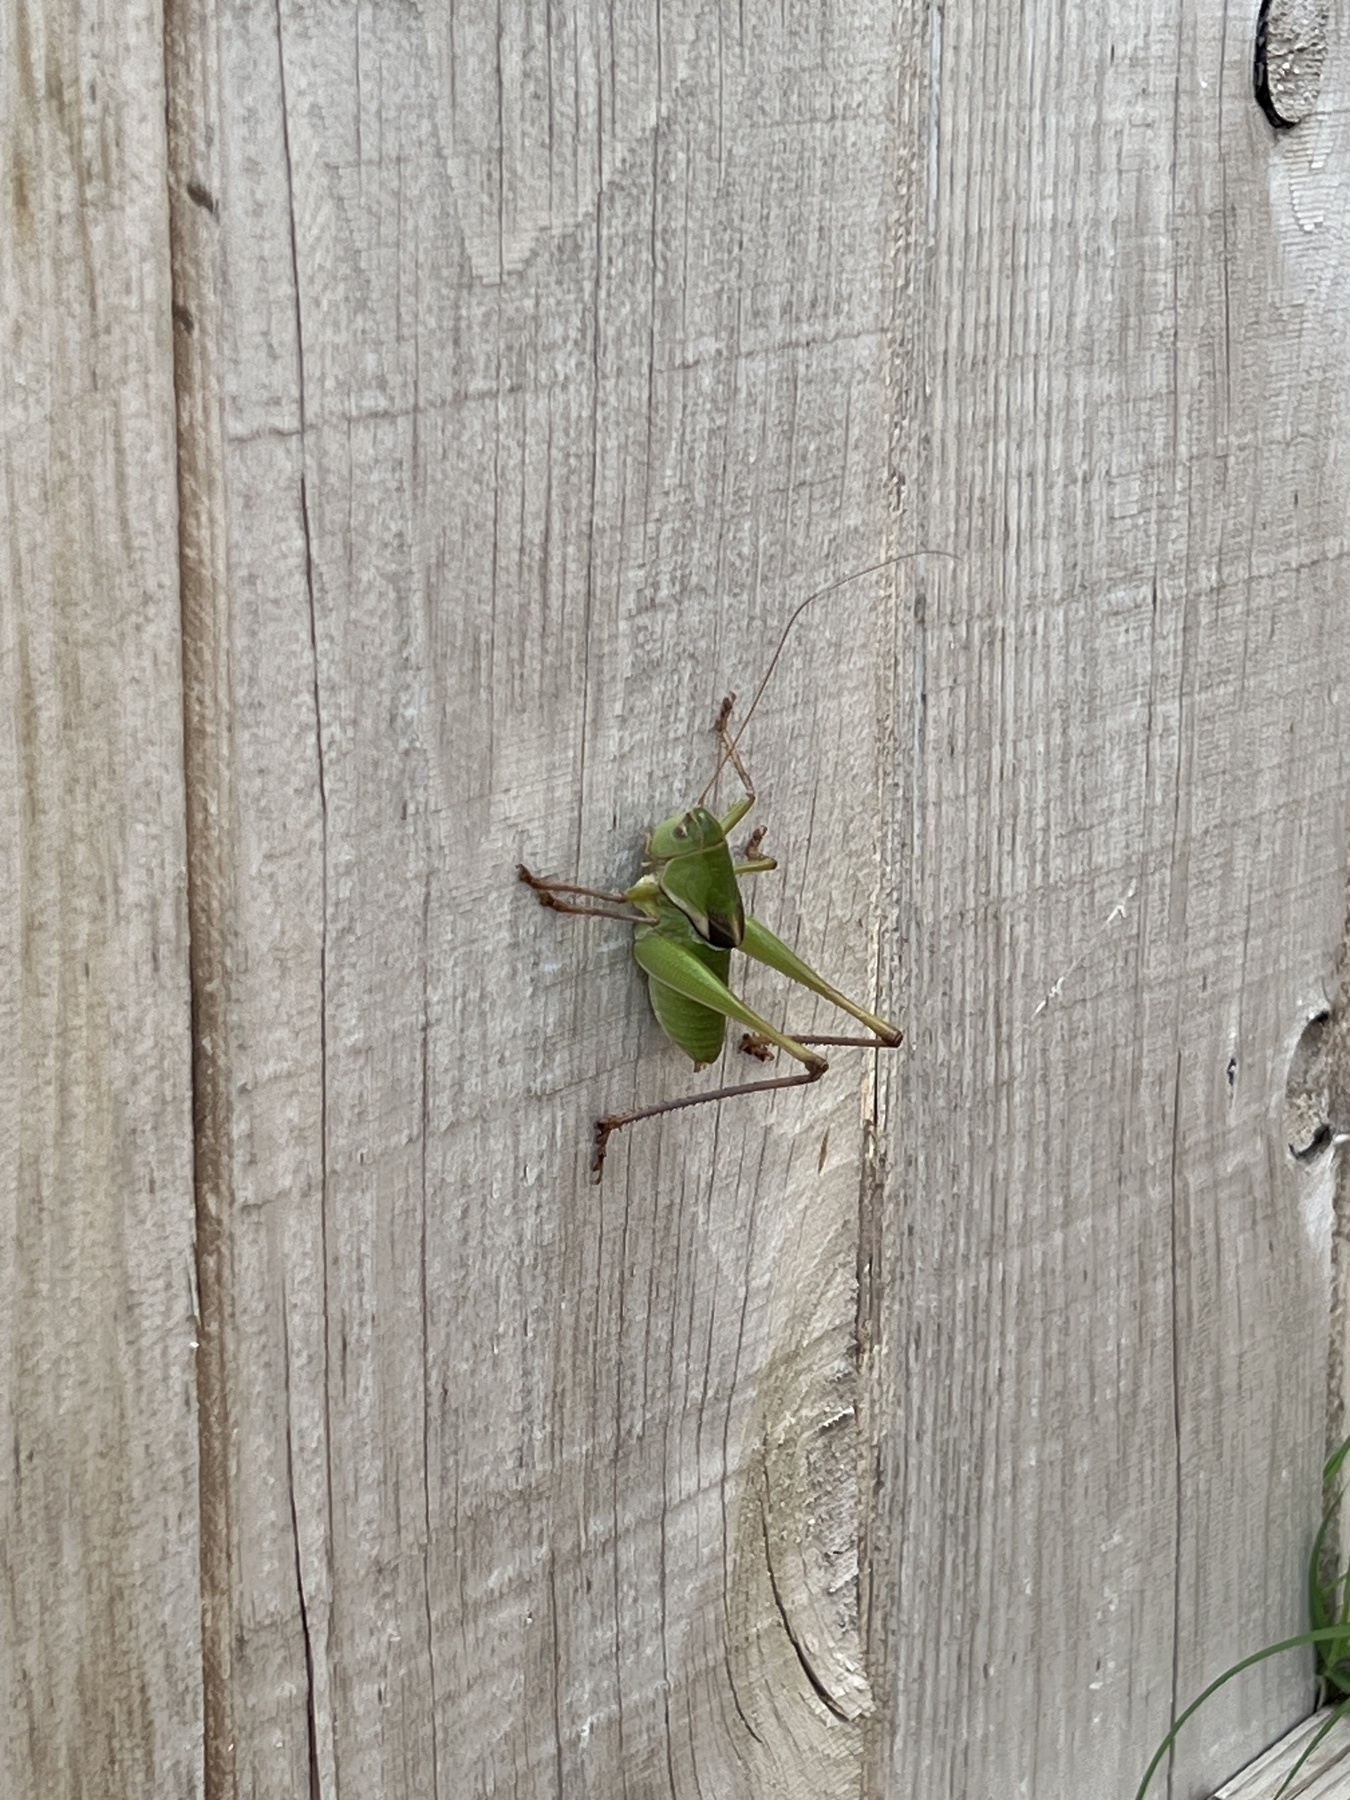 A green insect against a wooden fence, up close. 